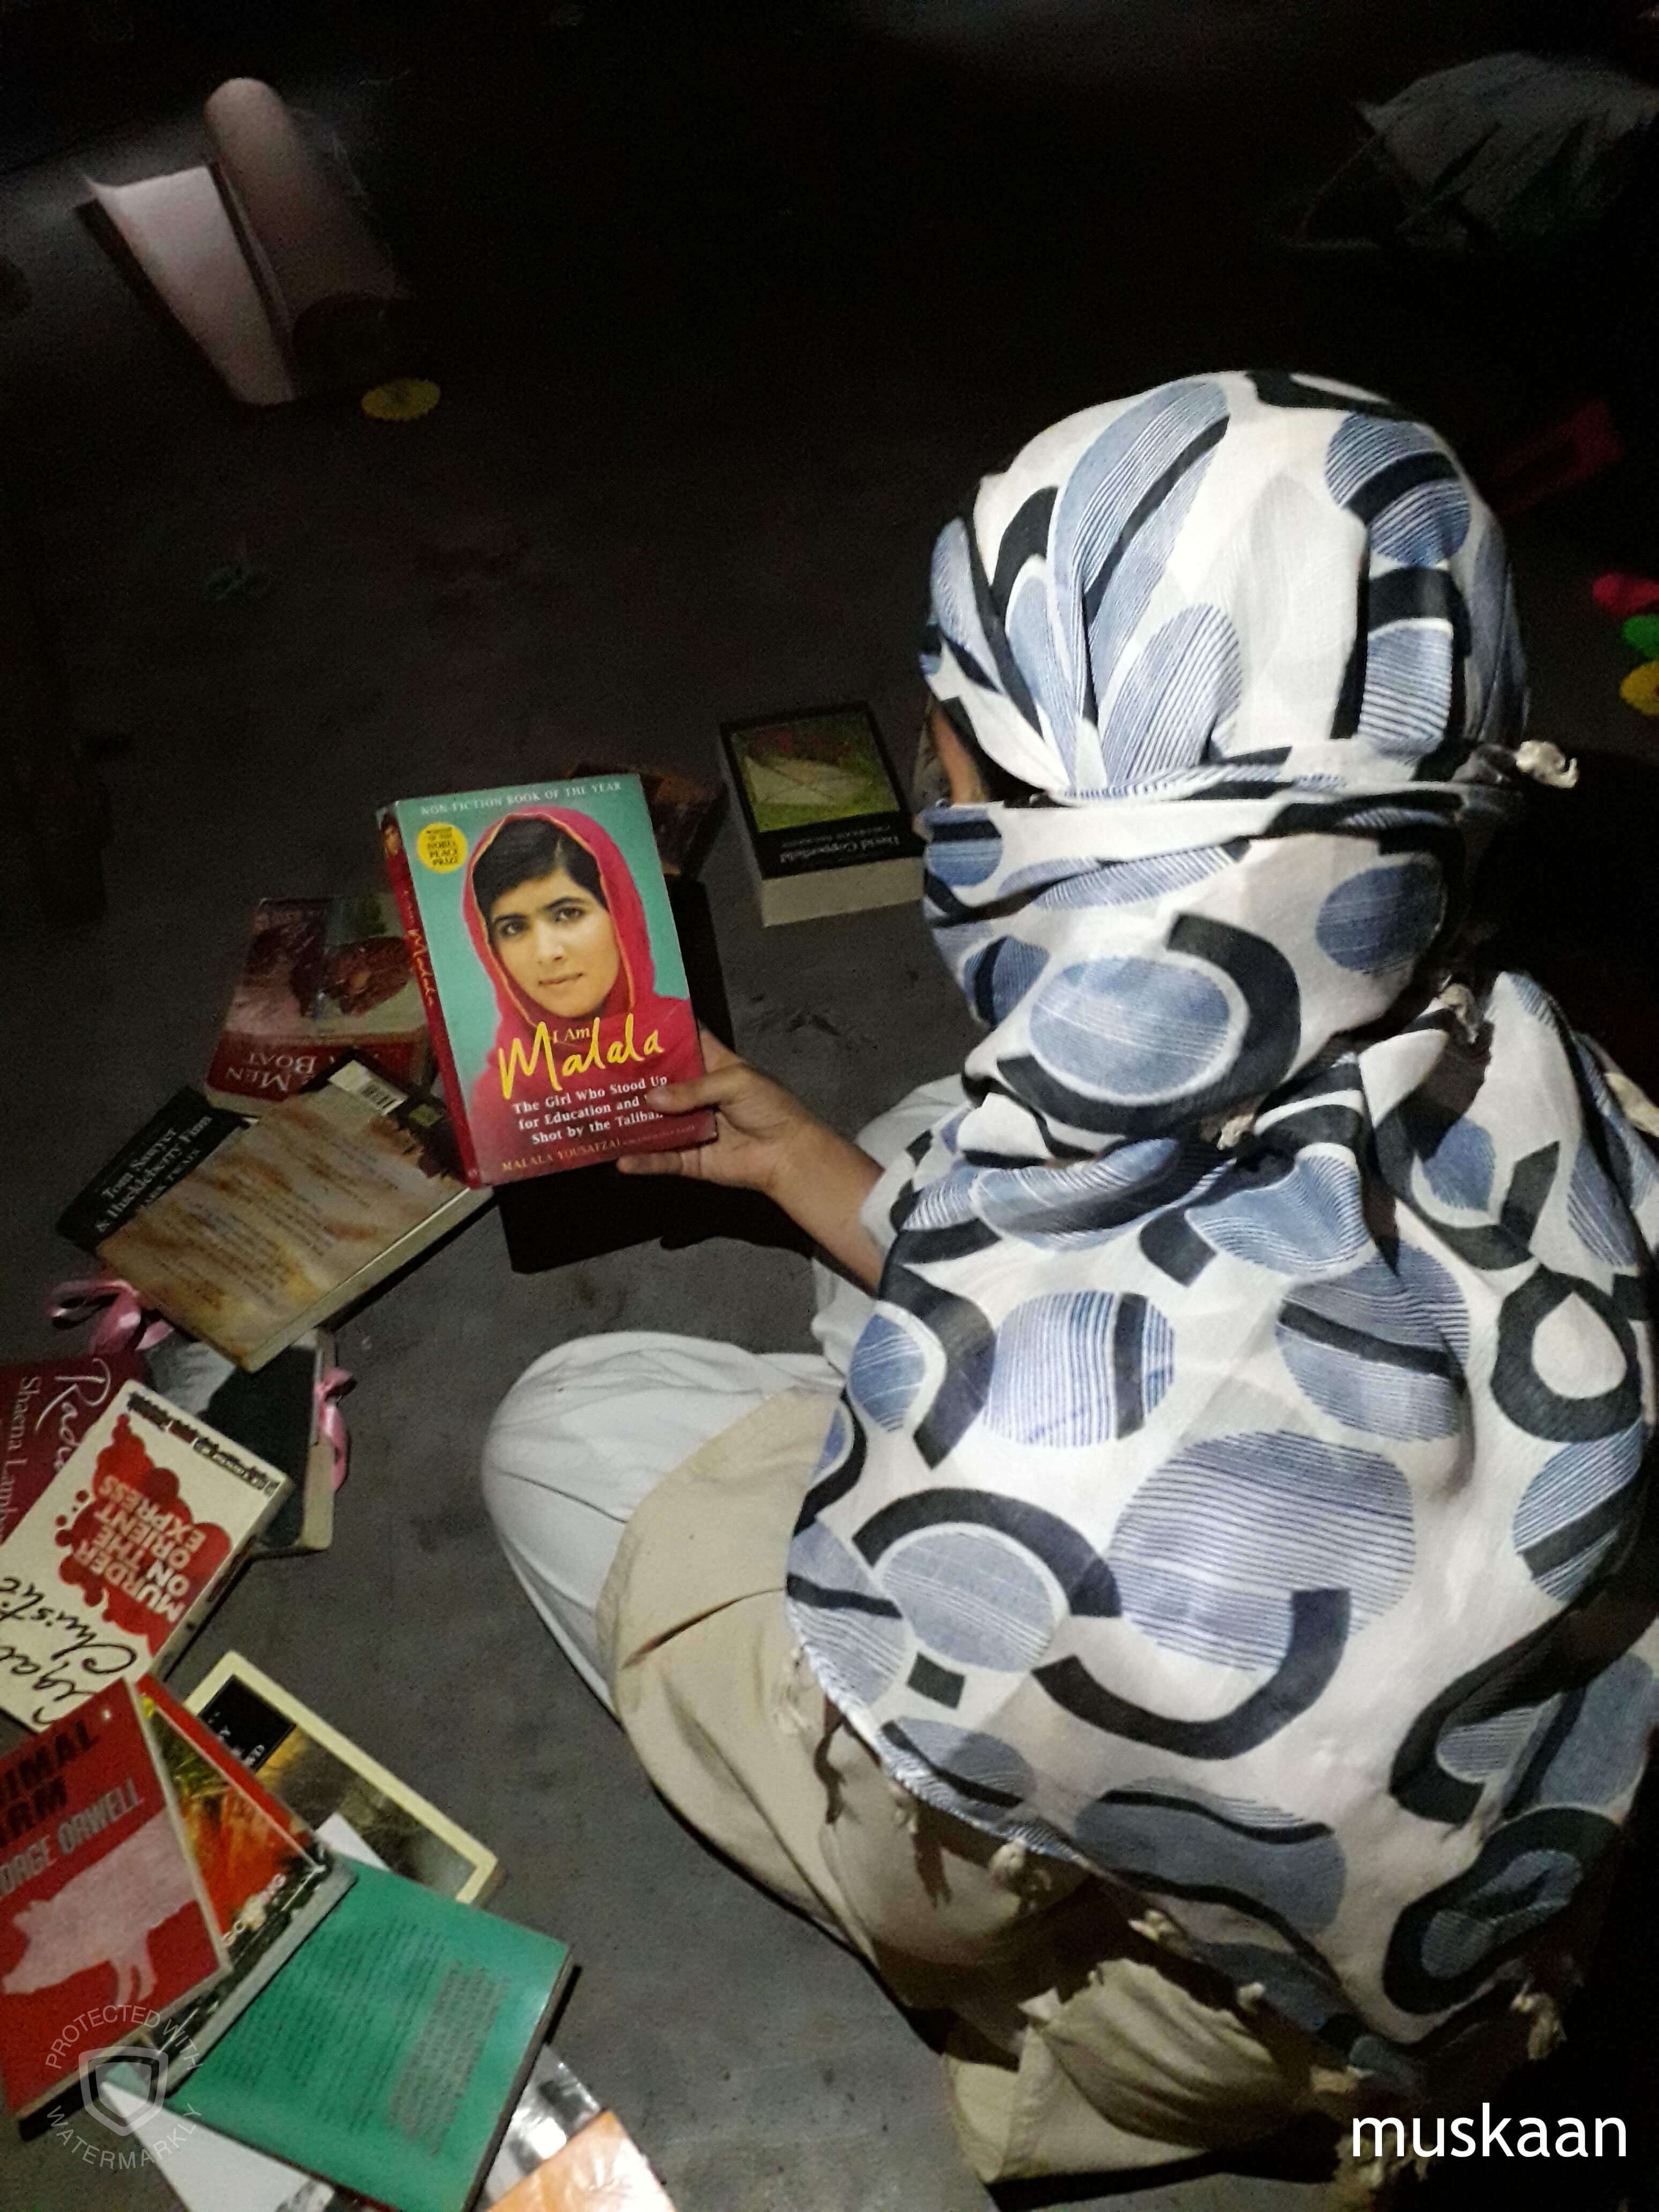 Malala's book held by a child